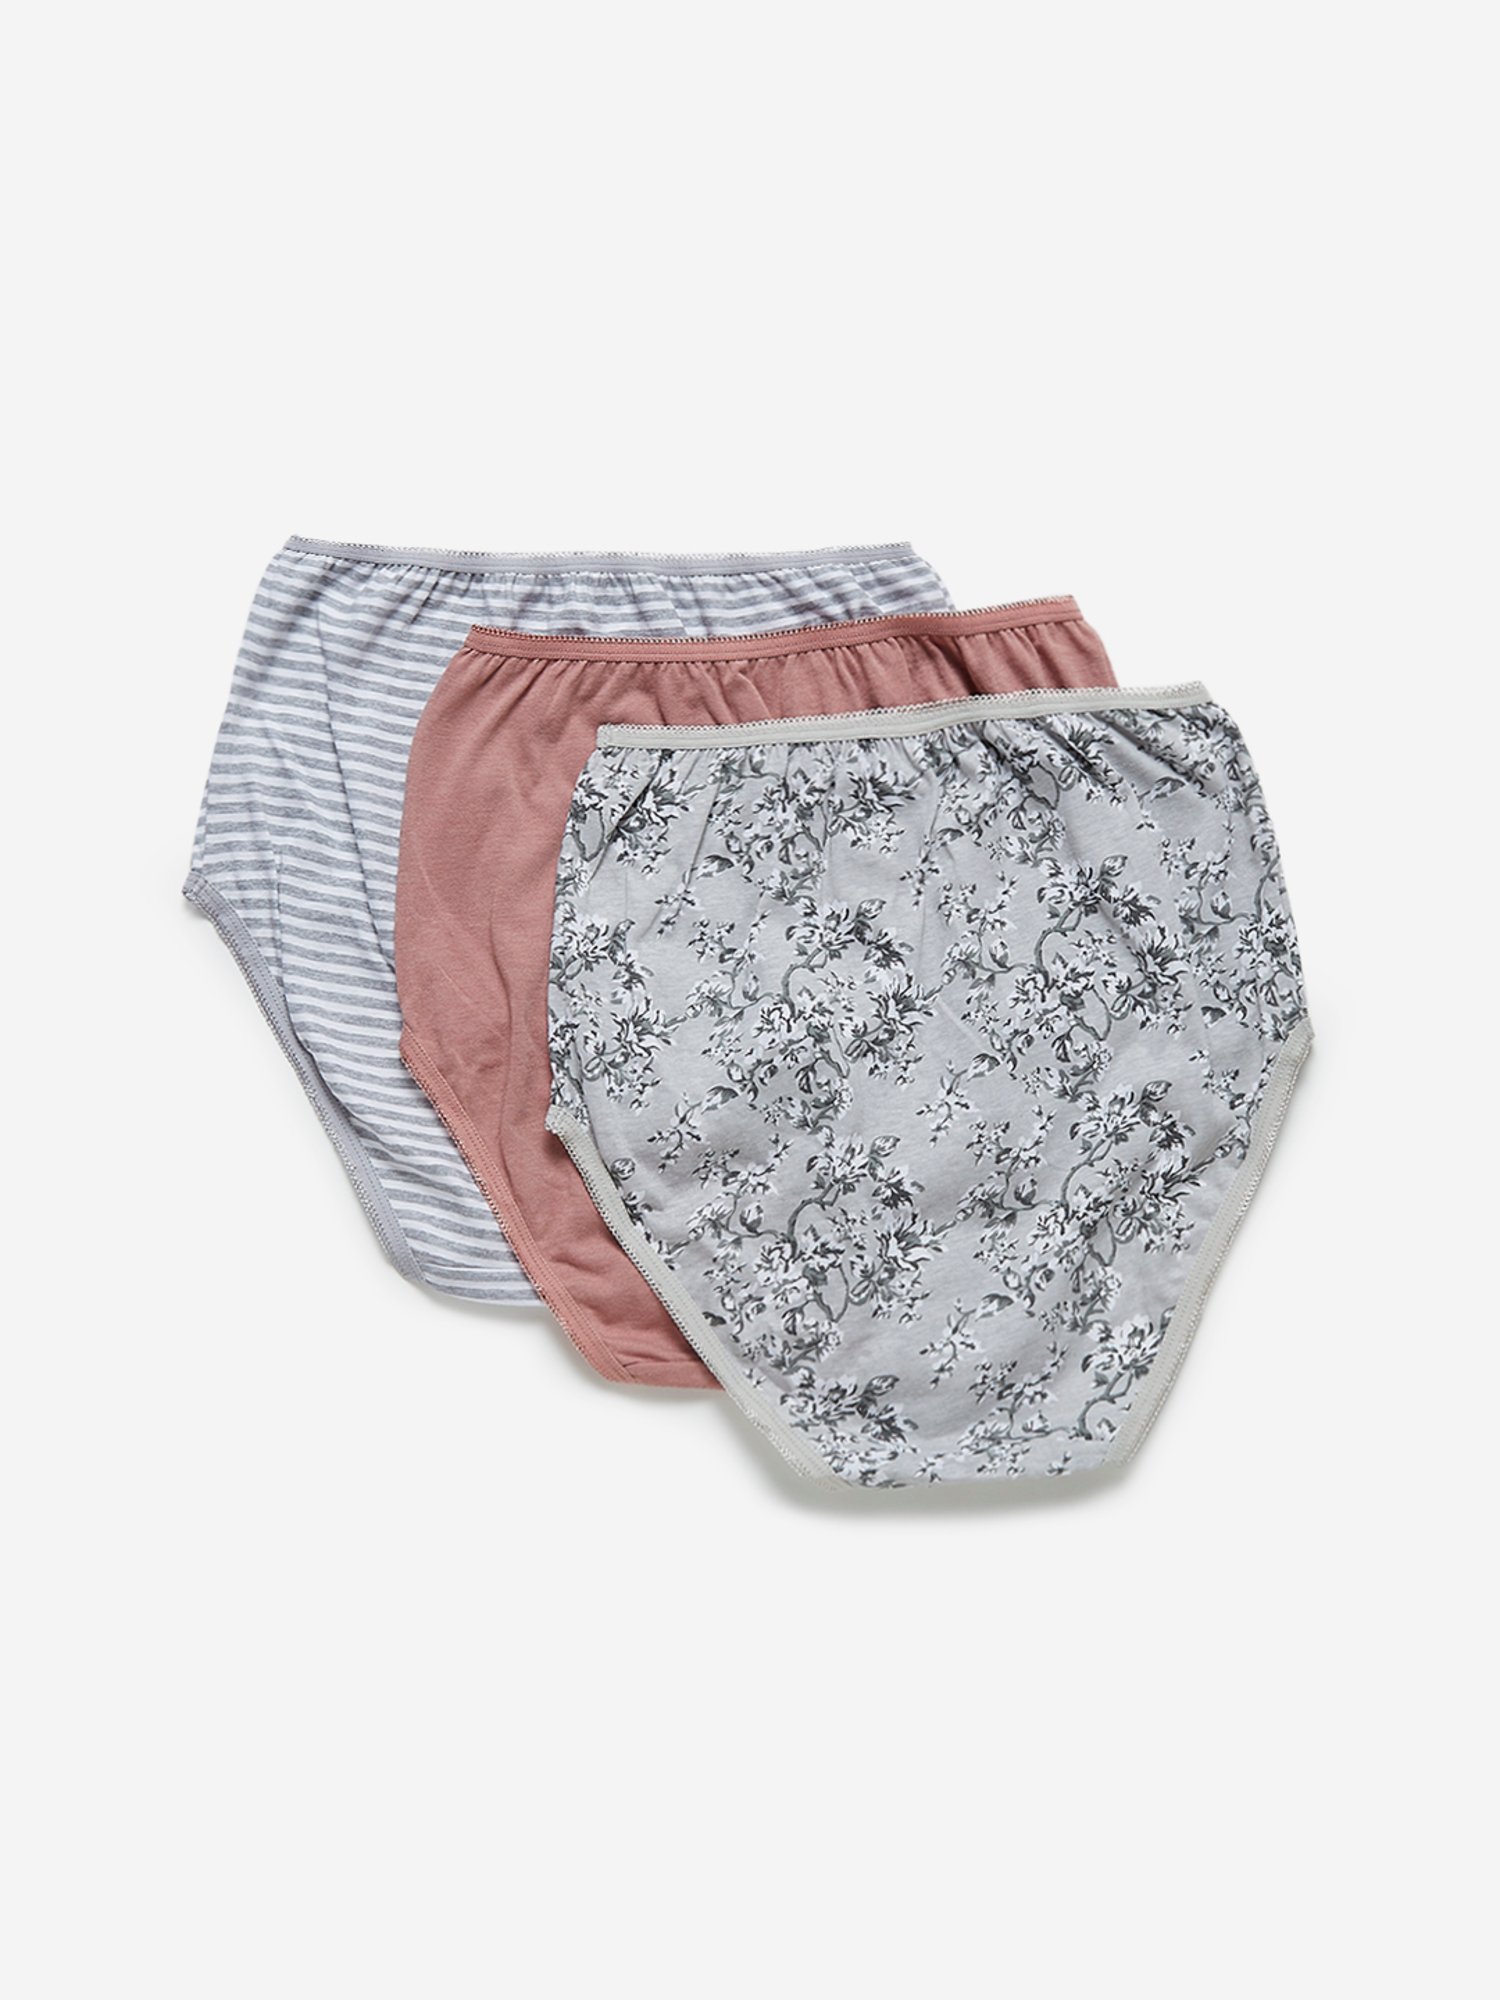 United Colors of Benetton Pink & Blue Striped Brief Panties - Pack